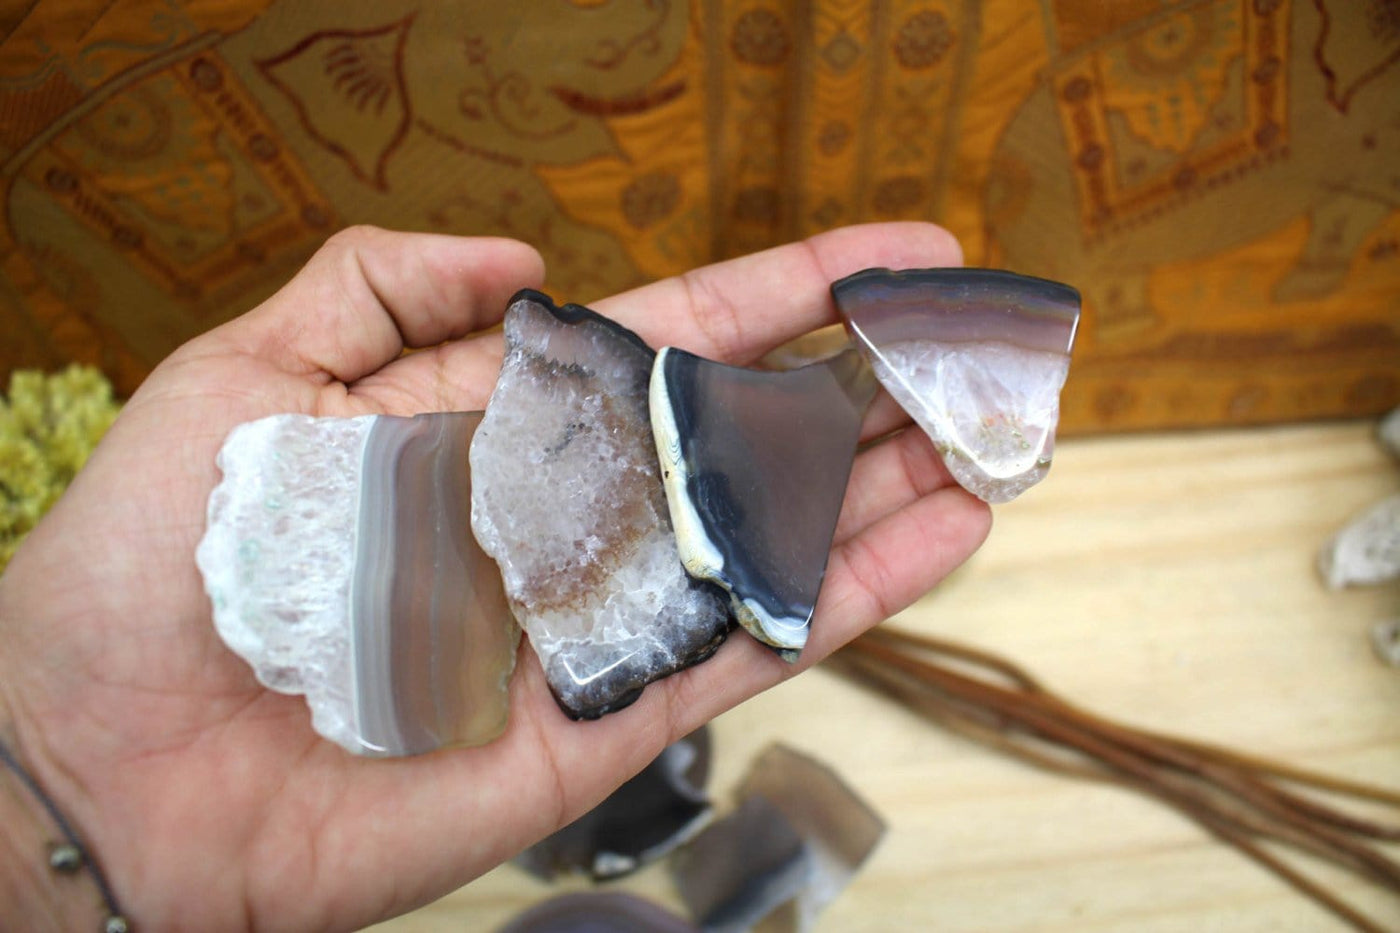 4 Tumbled Agate Slices held in a palm